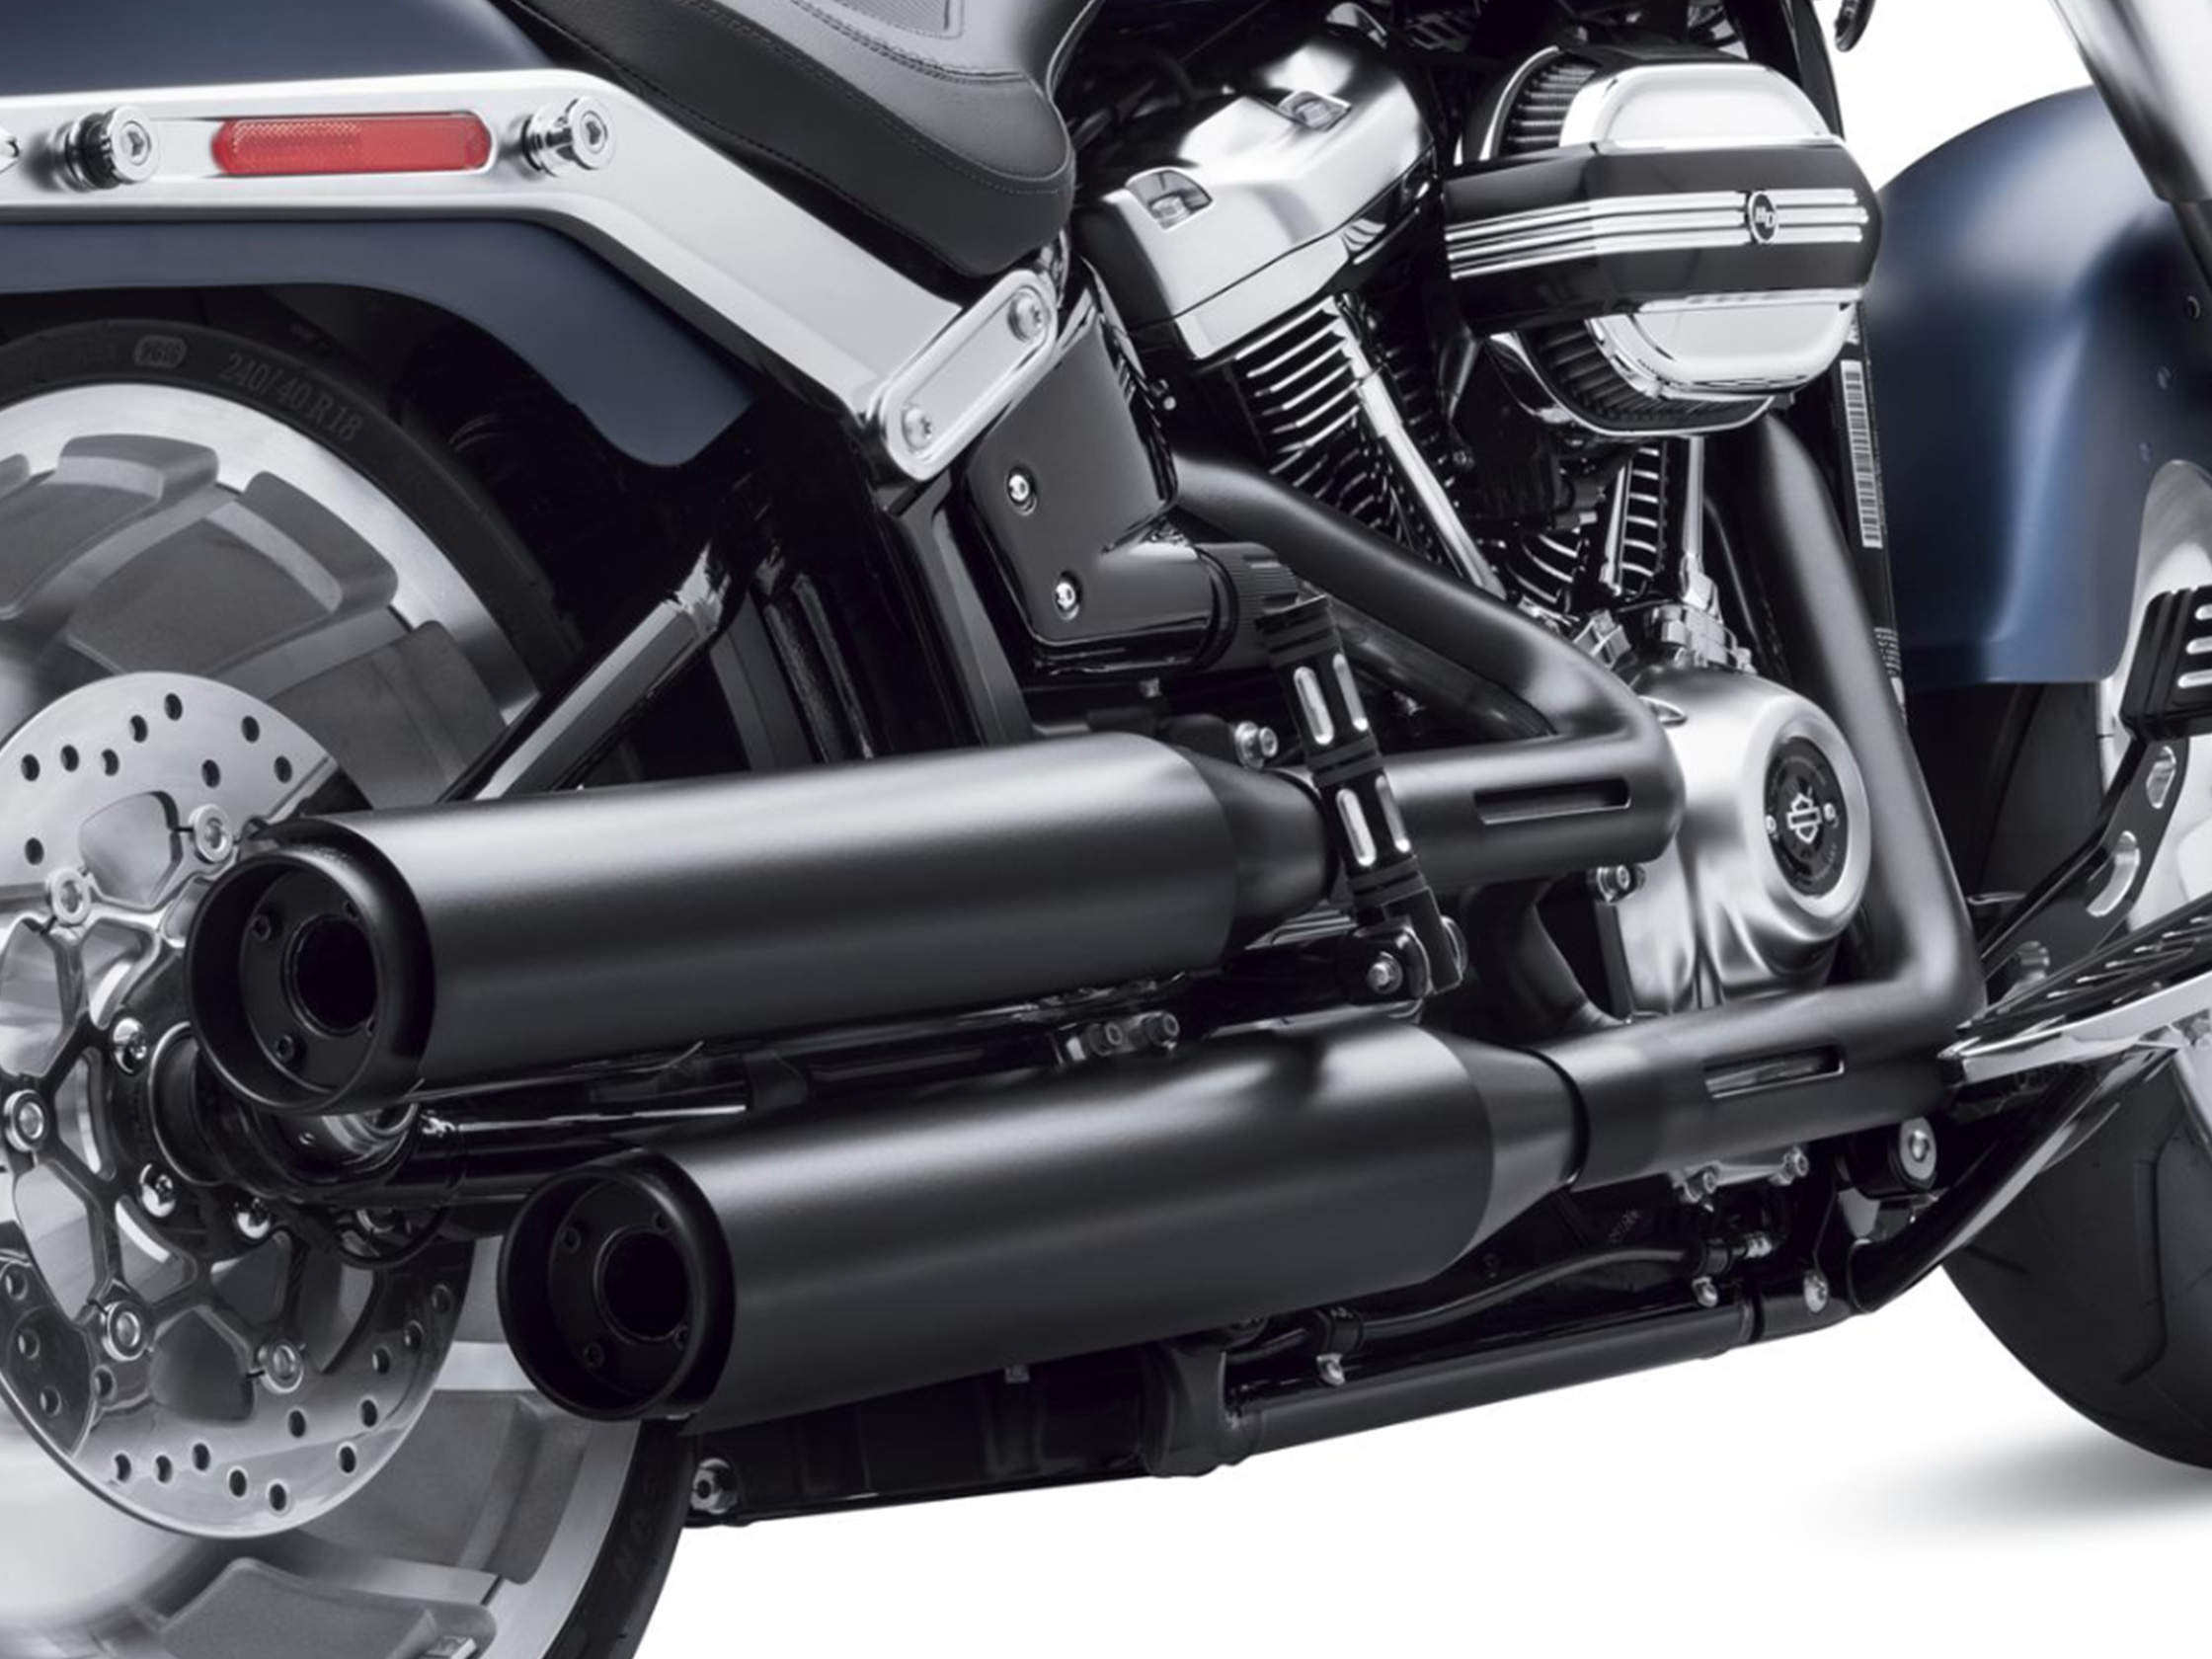 SATIN BLACK EXHAUST SHIELD KIT 65400460 / Exhaust Systems / Screamin´ eagle  / Parts & Accessories / - House-of-Flames Harley-Davidson